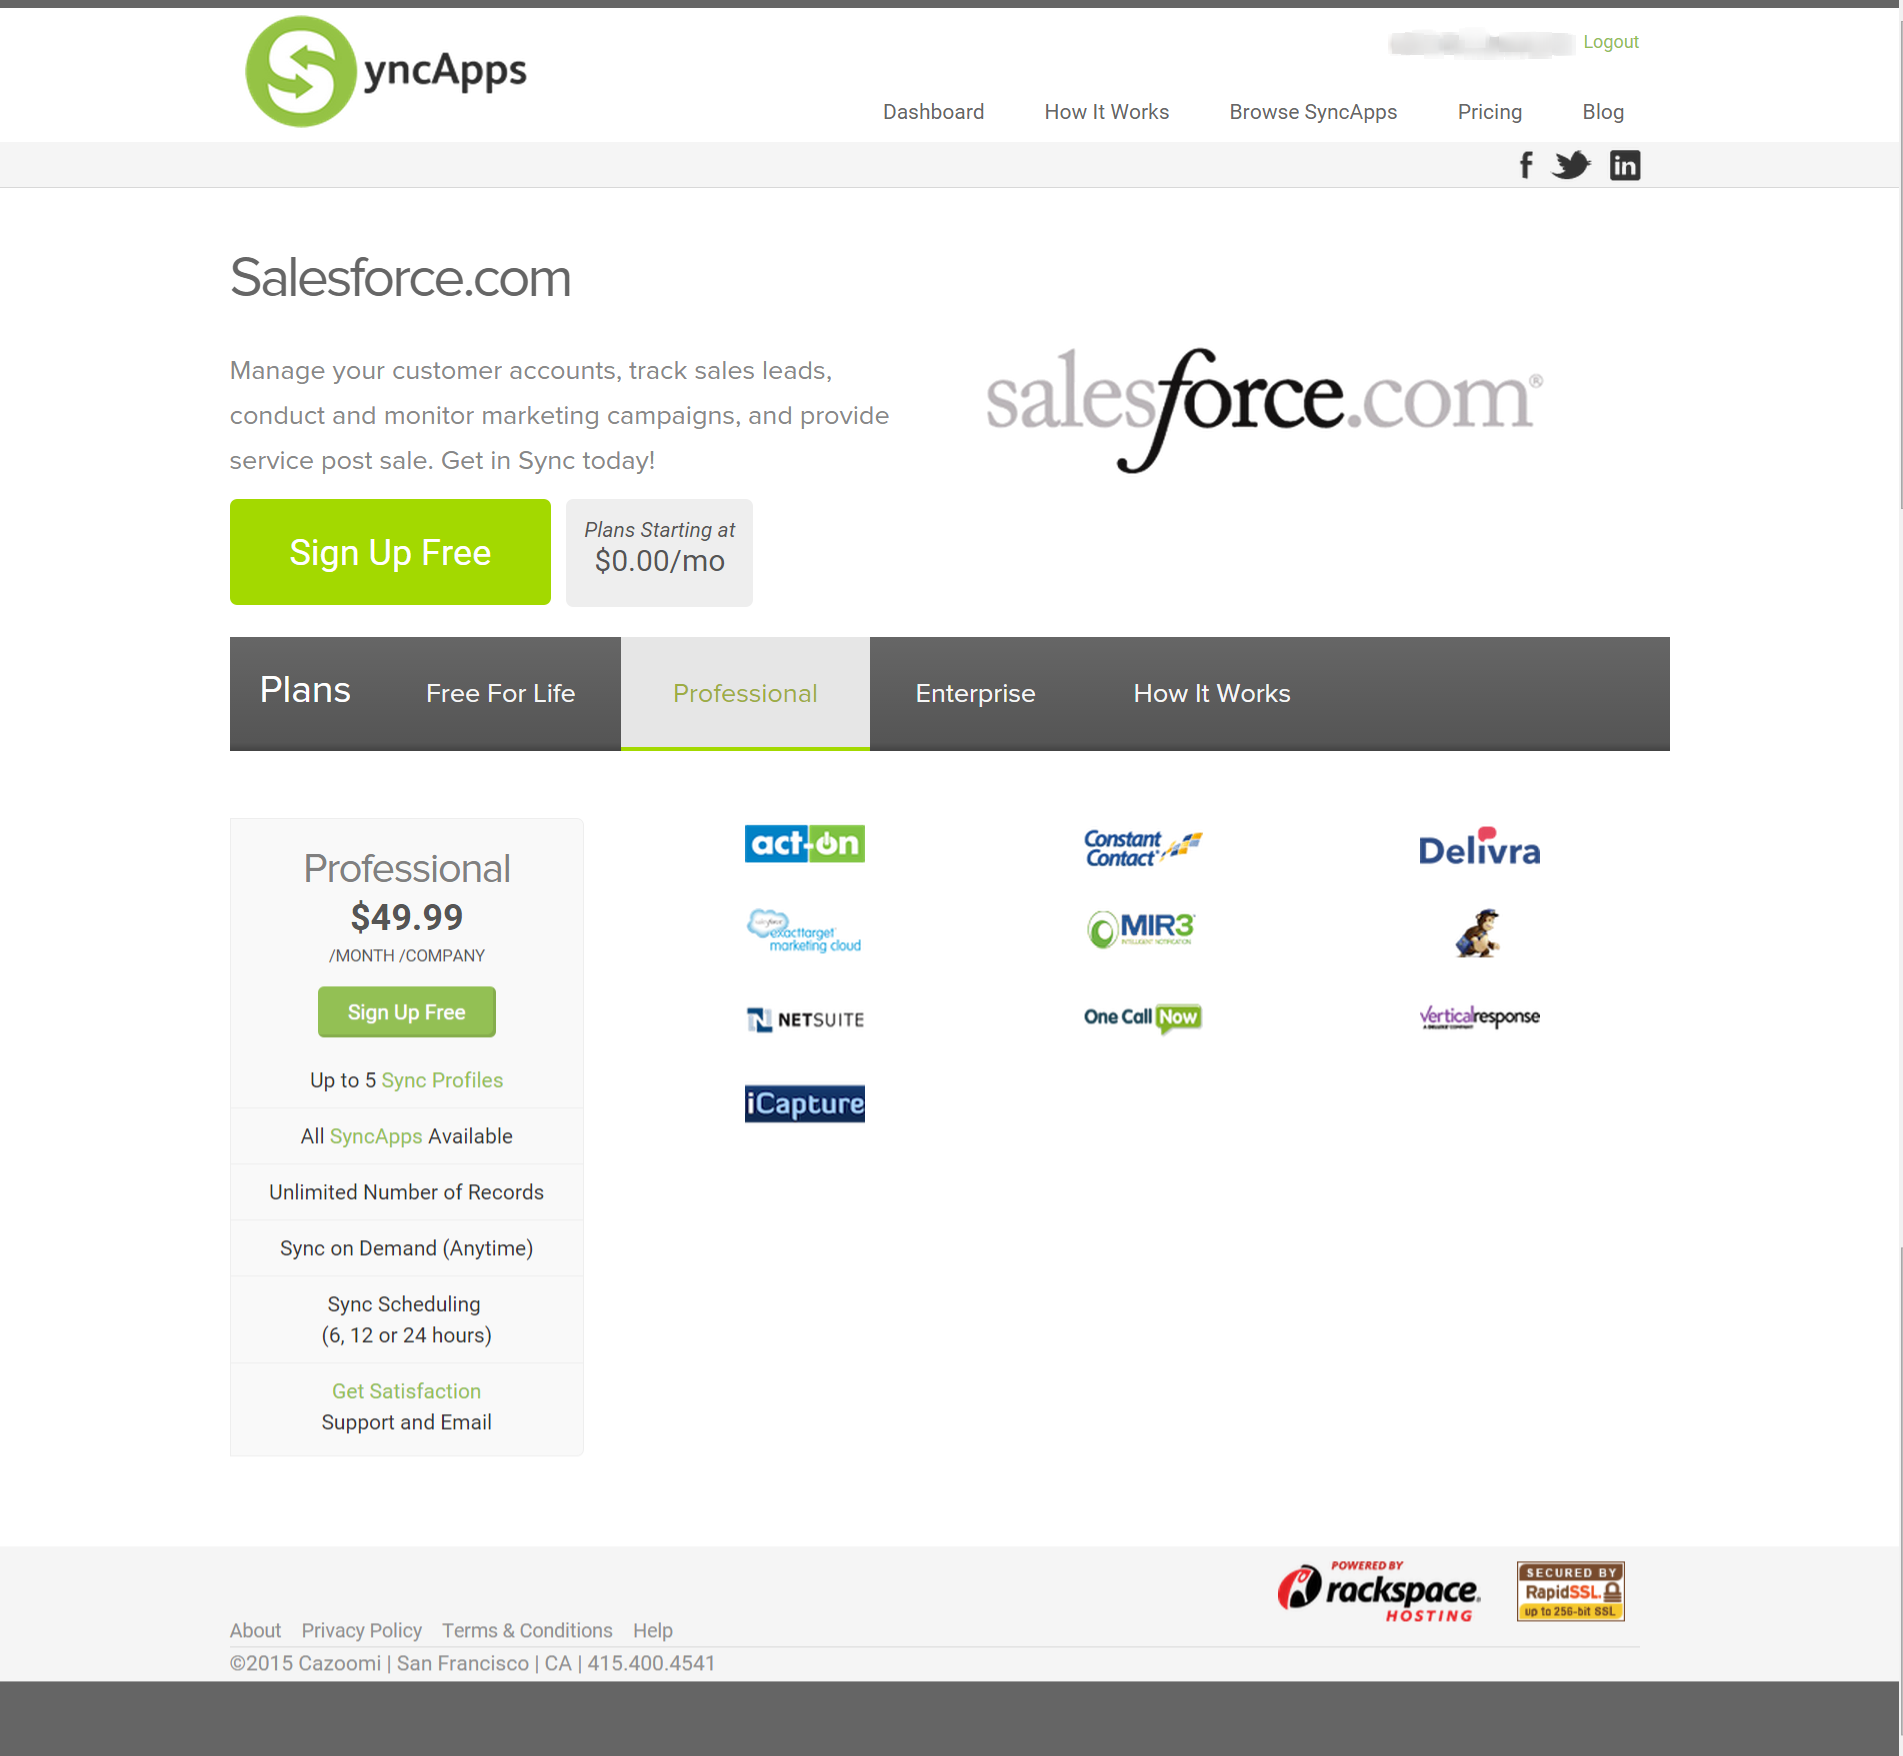 salesforce pricing strategy